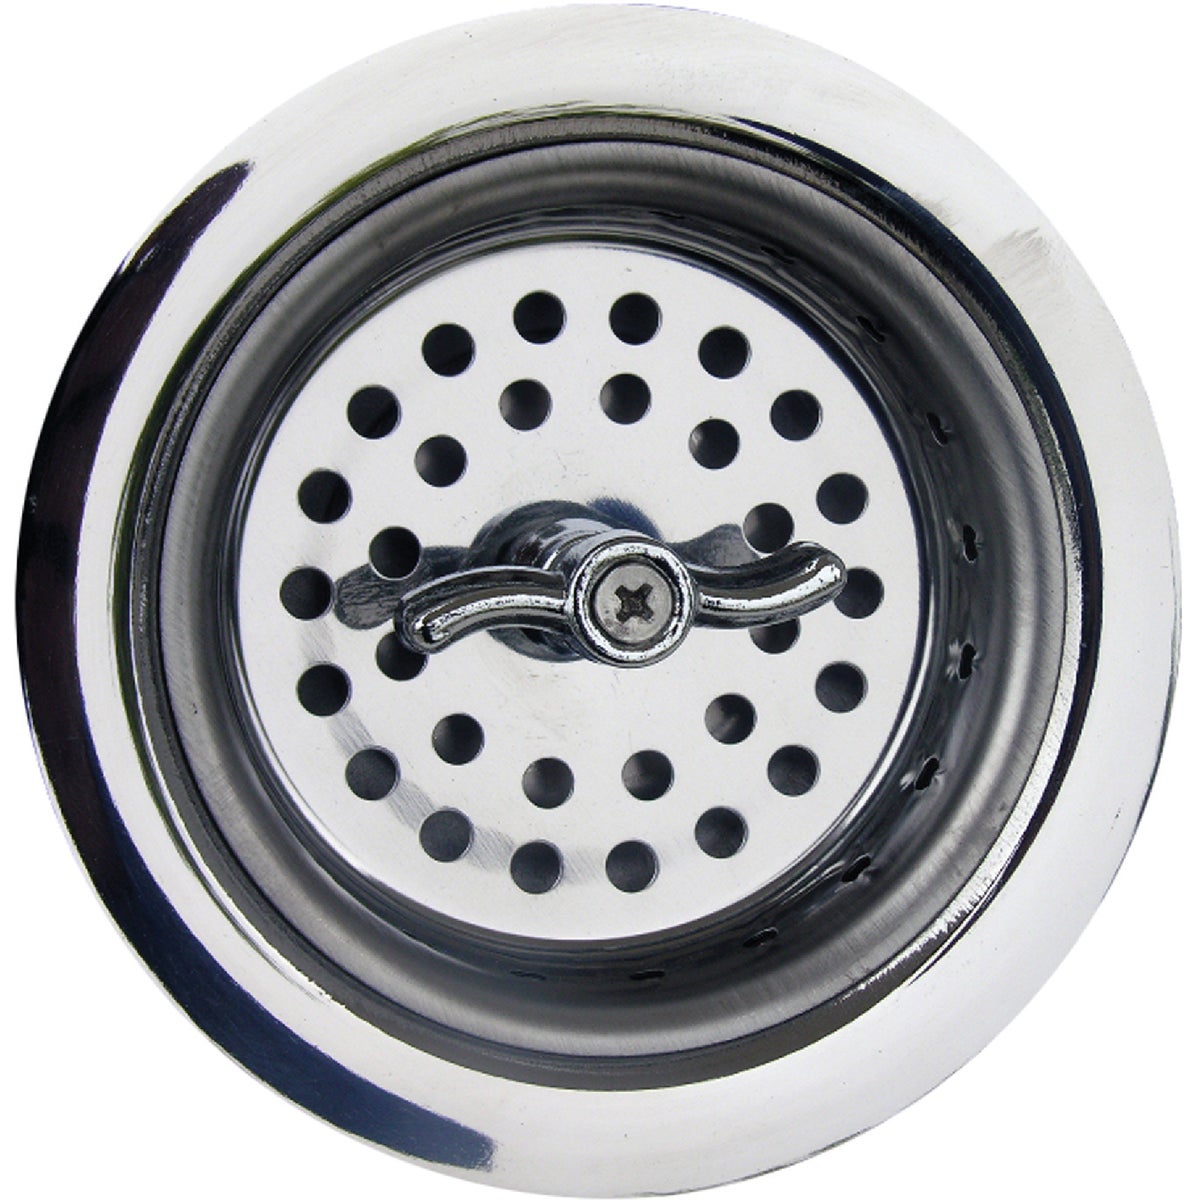 Lasco 3-1/2 In. Chrome Spin Type Basket Strainer Assembly